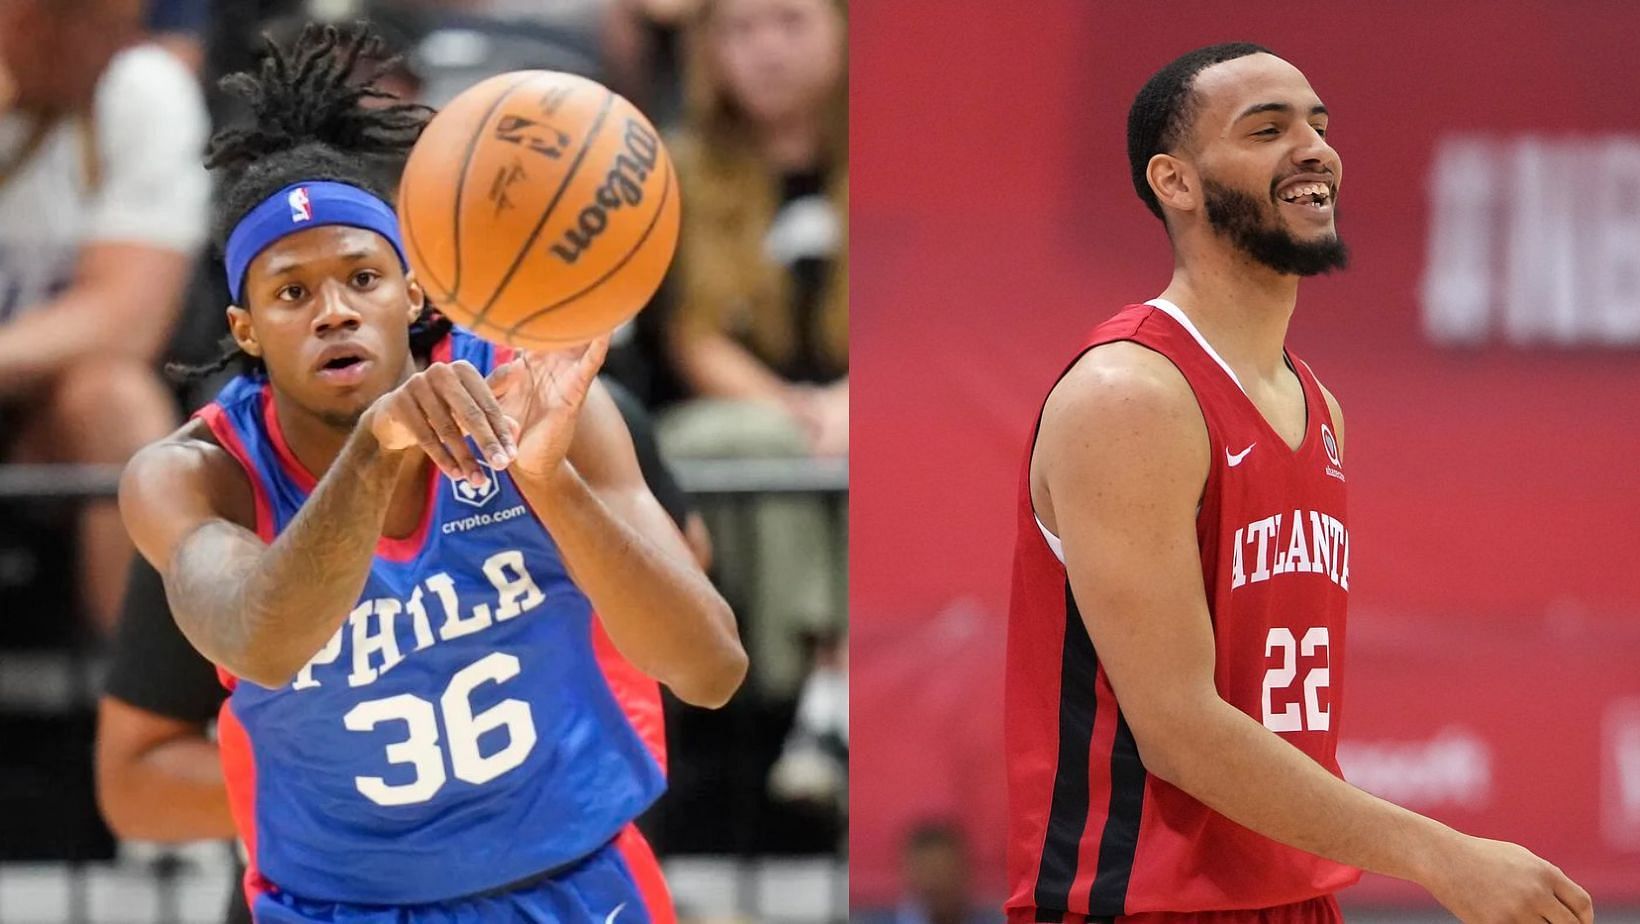 The Philadelphia 76ers will battle the Atlanta Hawks at the Cox Pavilion as the NBA Summer League in Las Vegas continues.